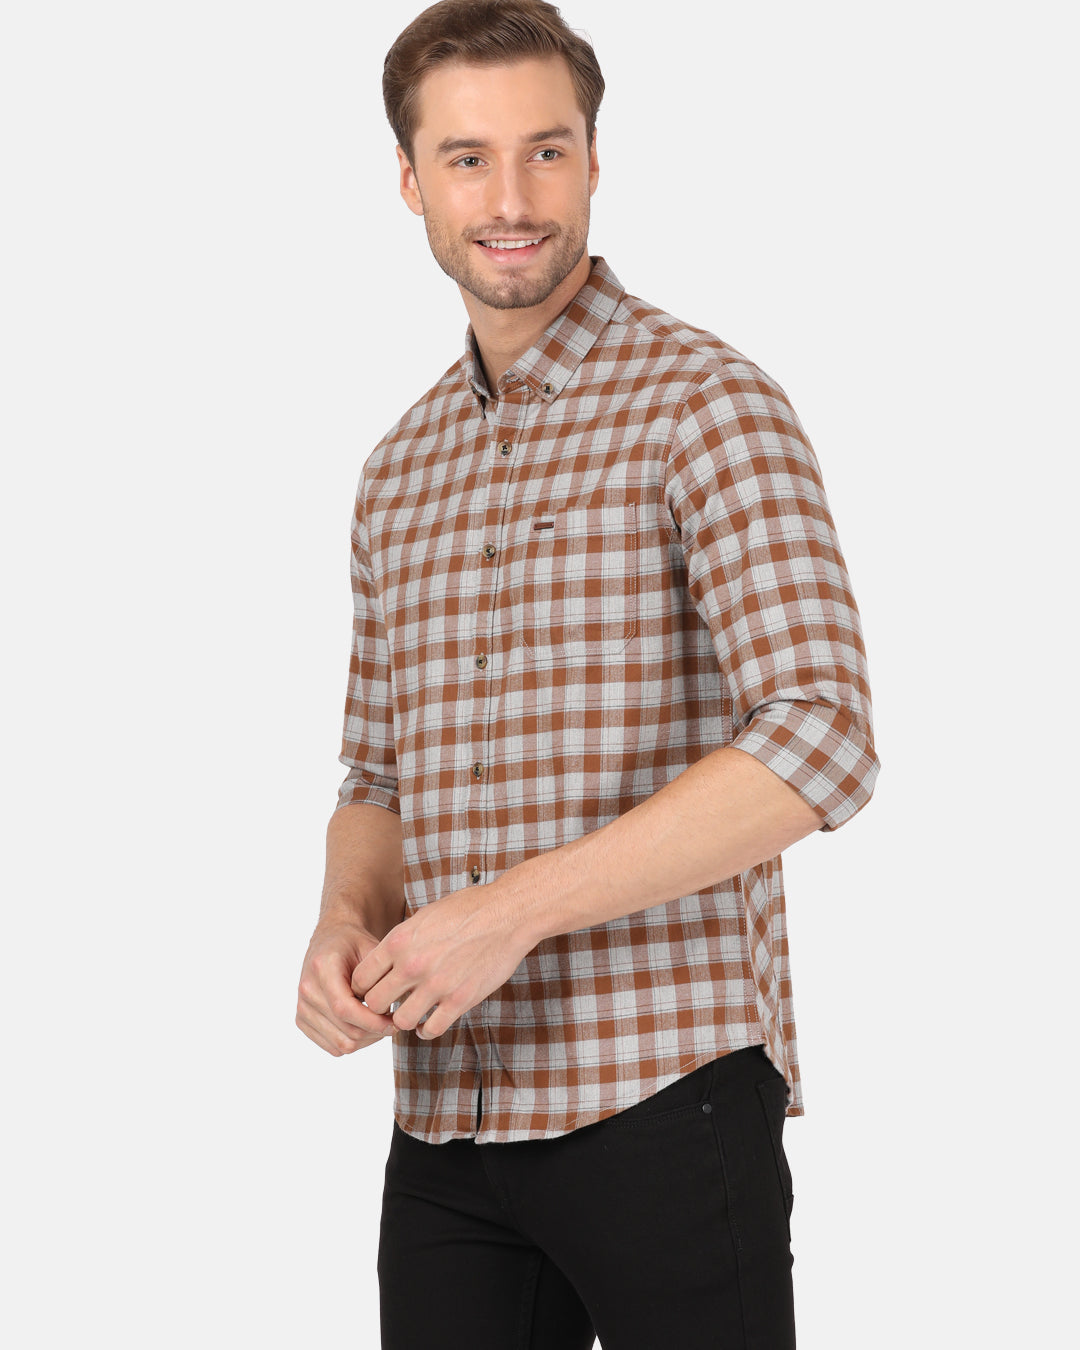 Crocodile Men's Casual Full Sleeve Comfort Fit Checks Brown with Collar Shirt